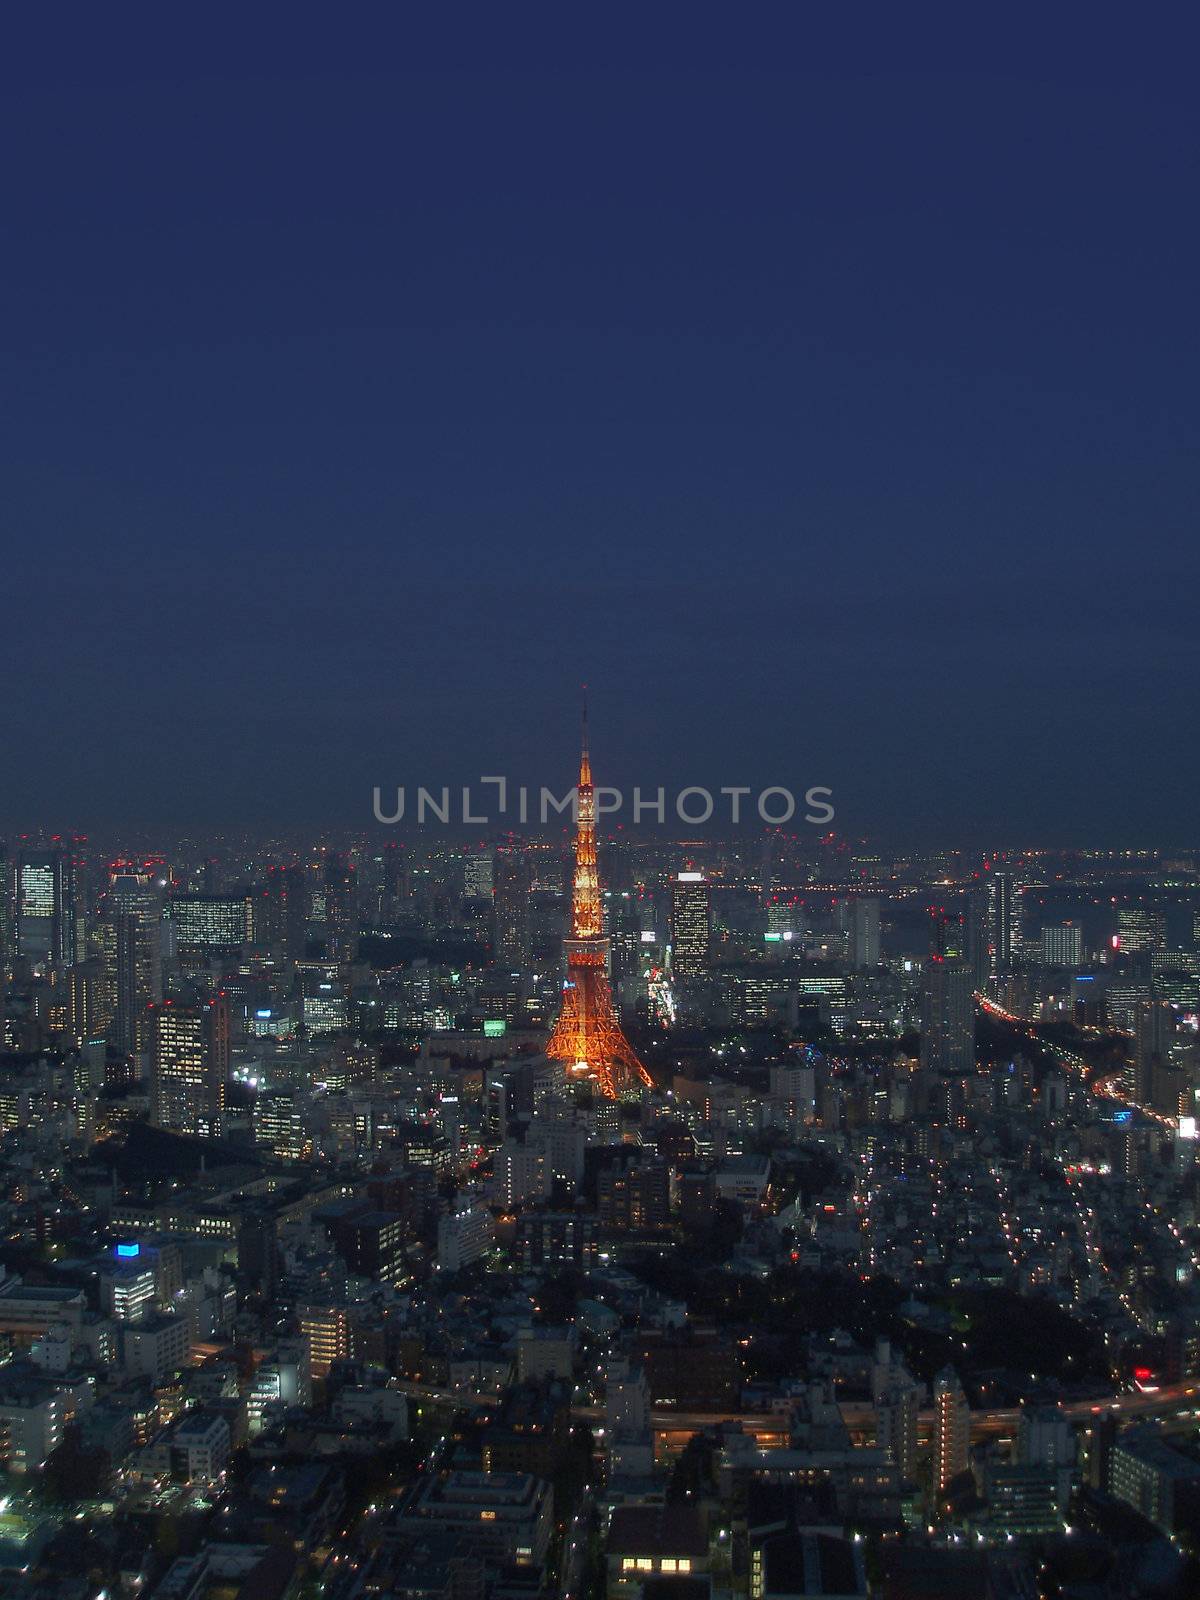 a view of tokyo from above at dusk